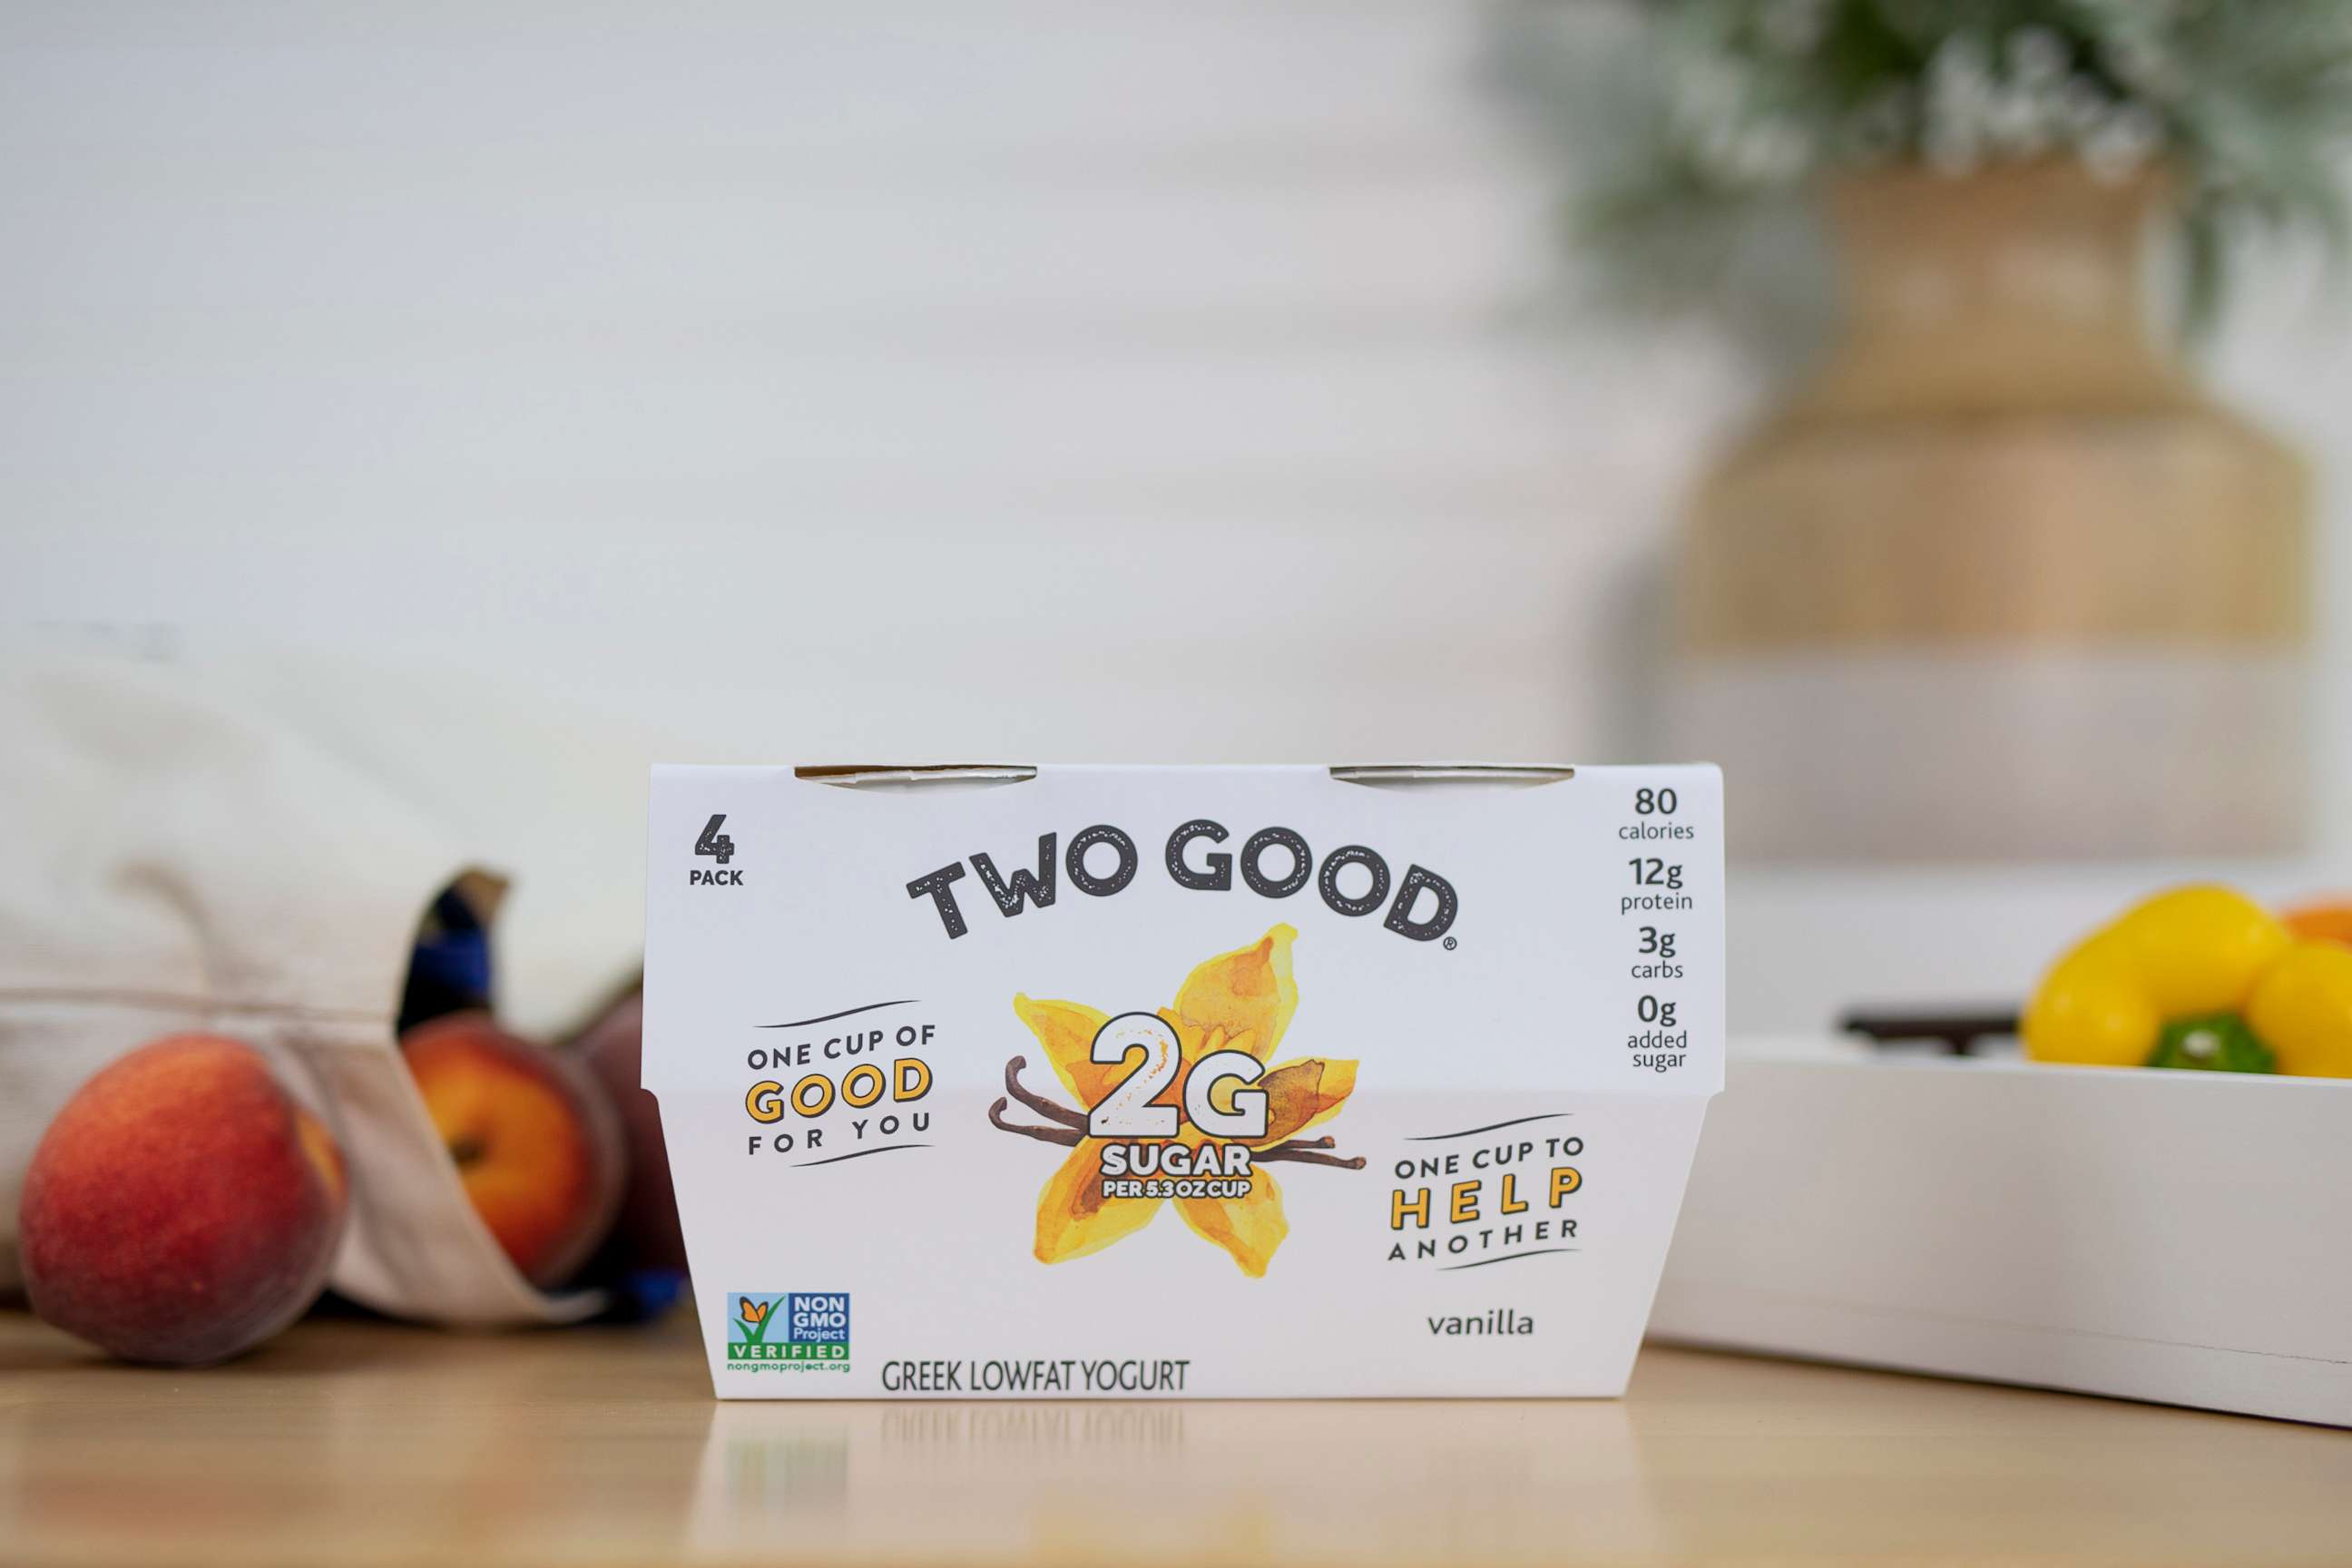 PHOTO: Two Good will provide an equal amount of food to people in need for every purchase of Two Good yogurt by consumers.